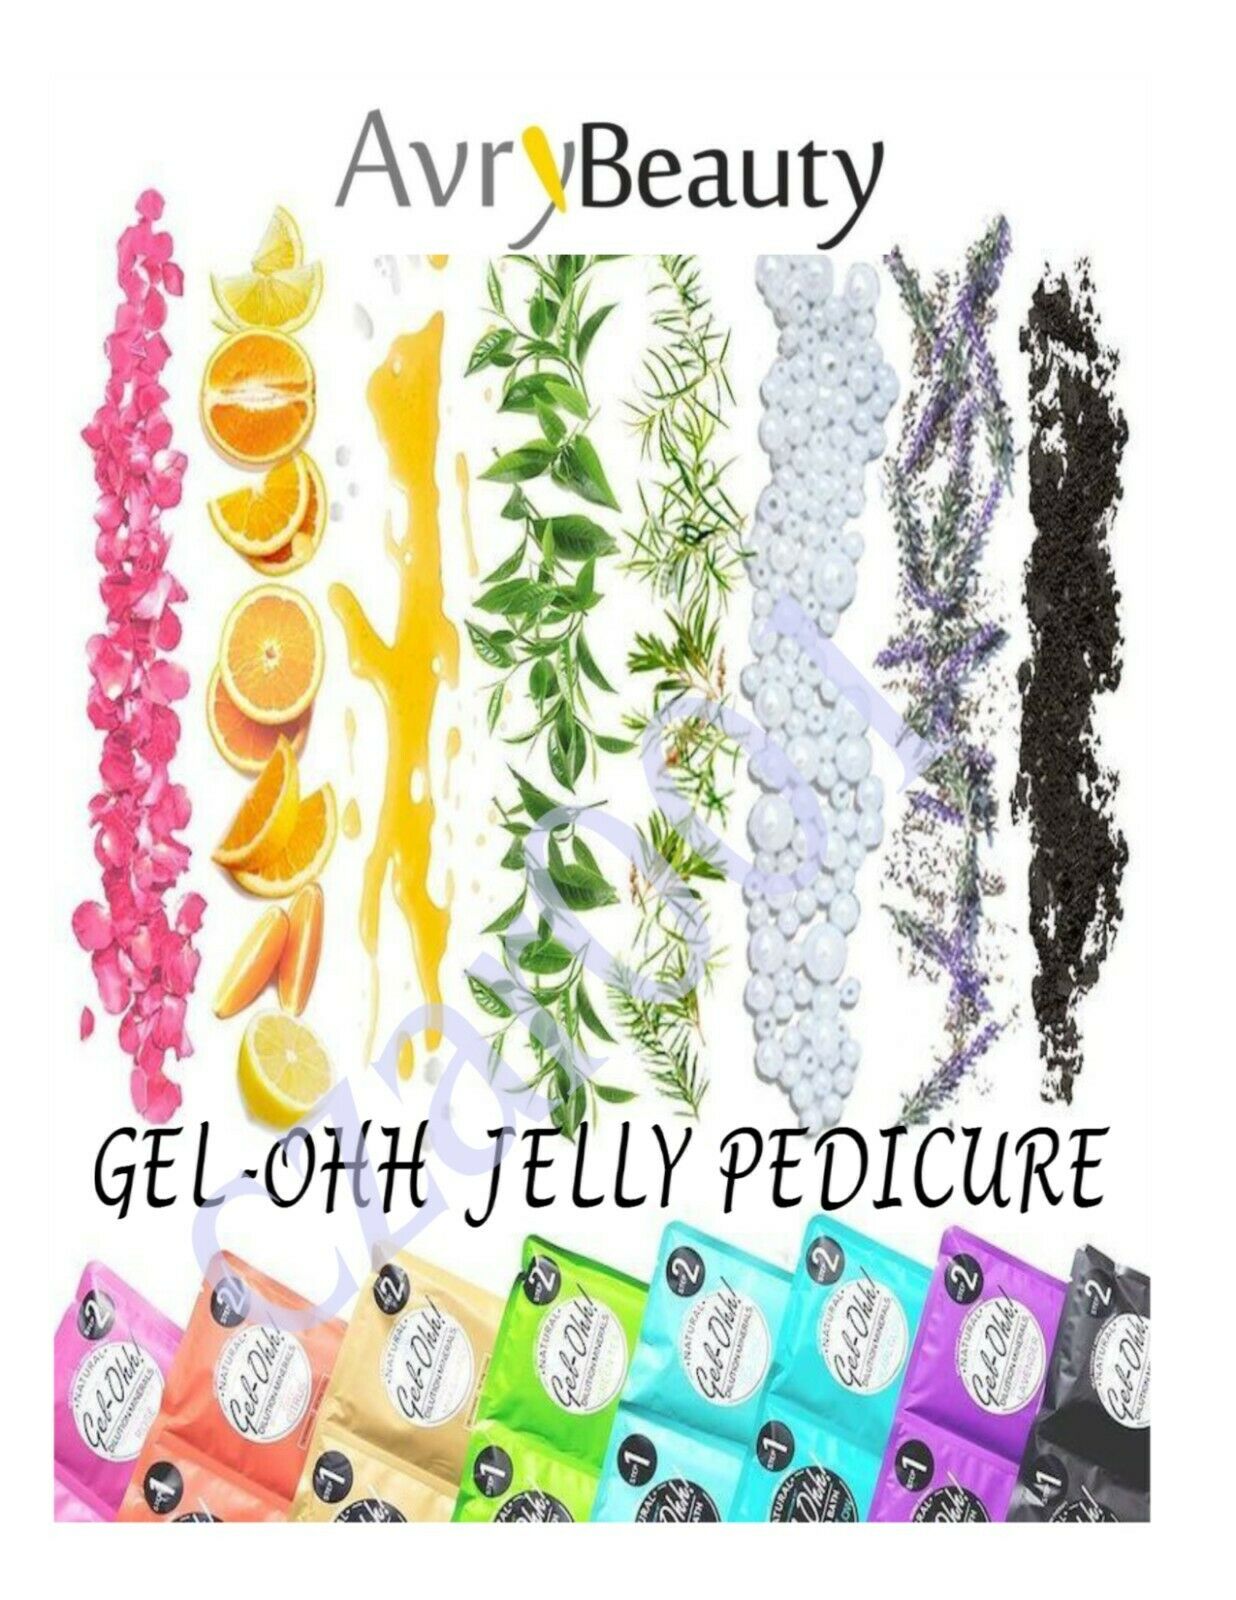 Voesh Avry Beauty Gel-ohh Jelly Spa Set -1 & 2 Step In One - 9 Scents Available!